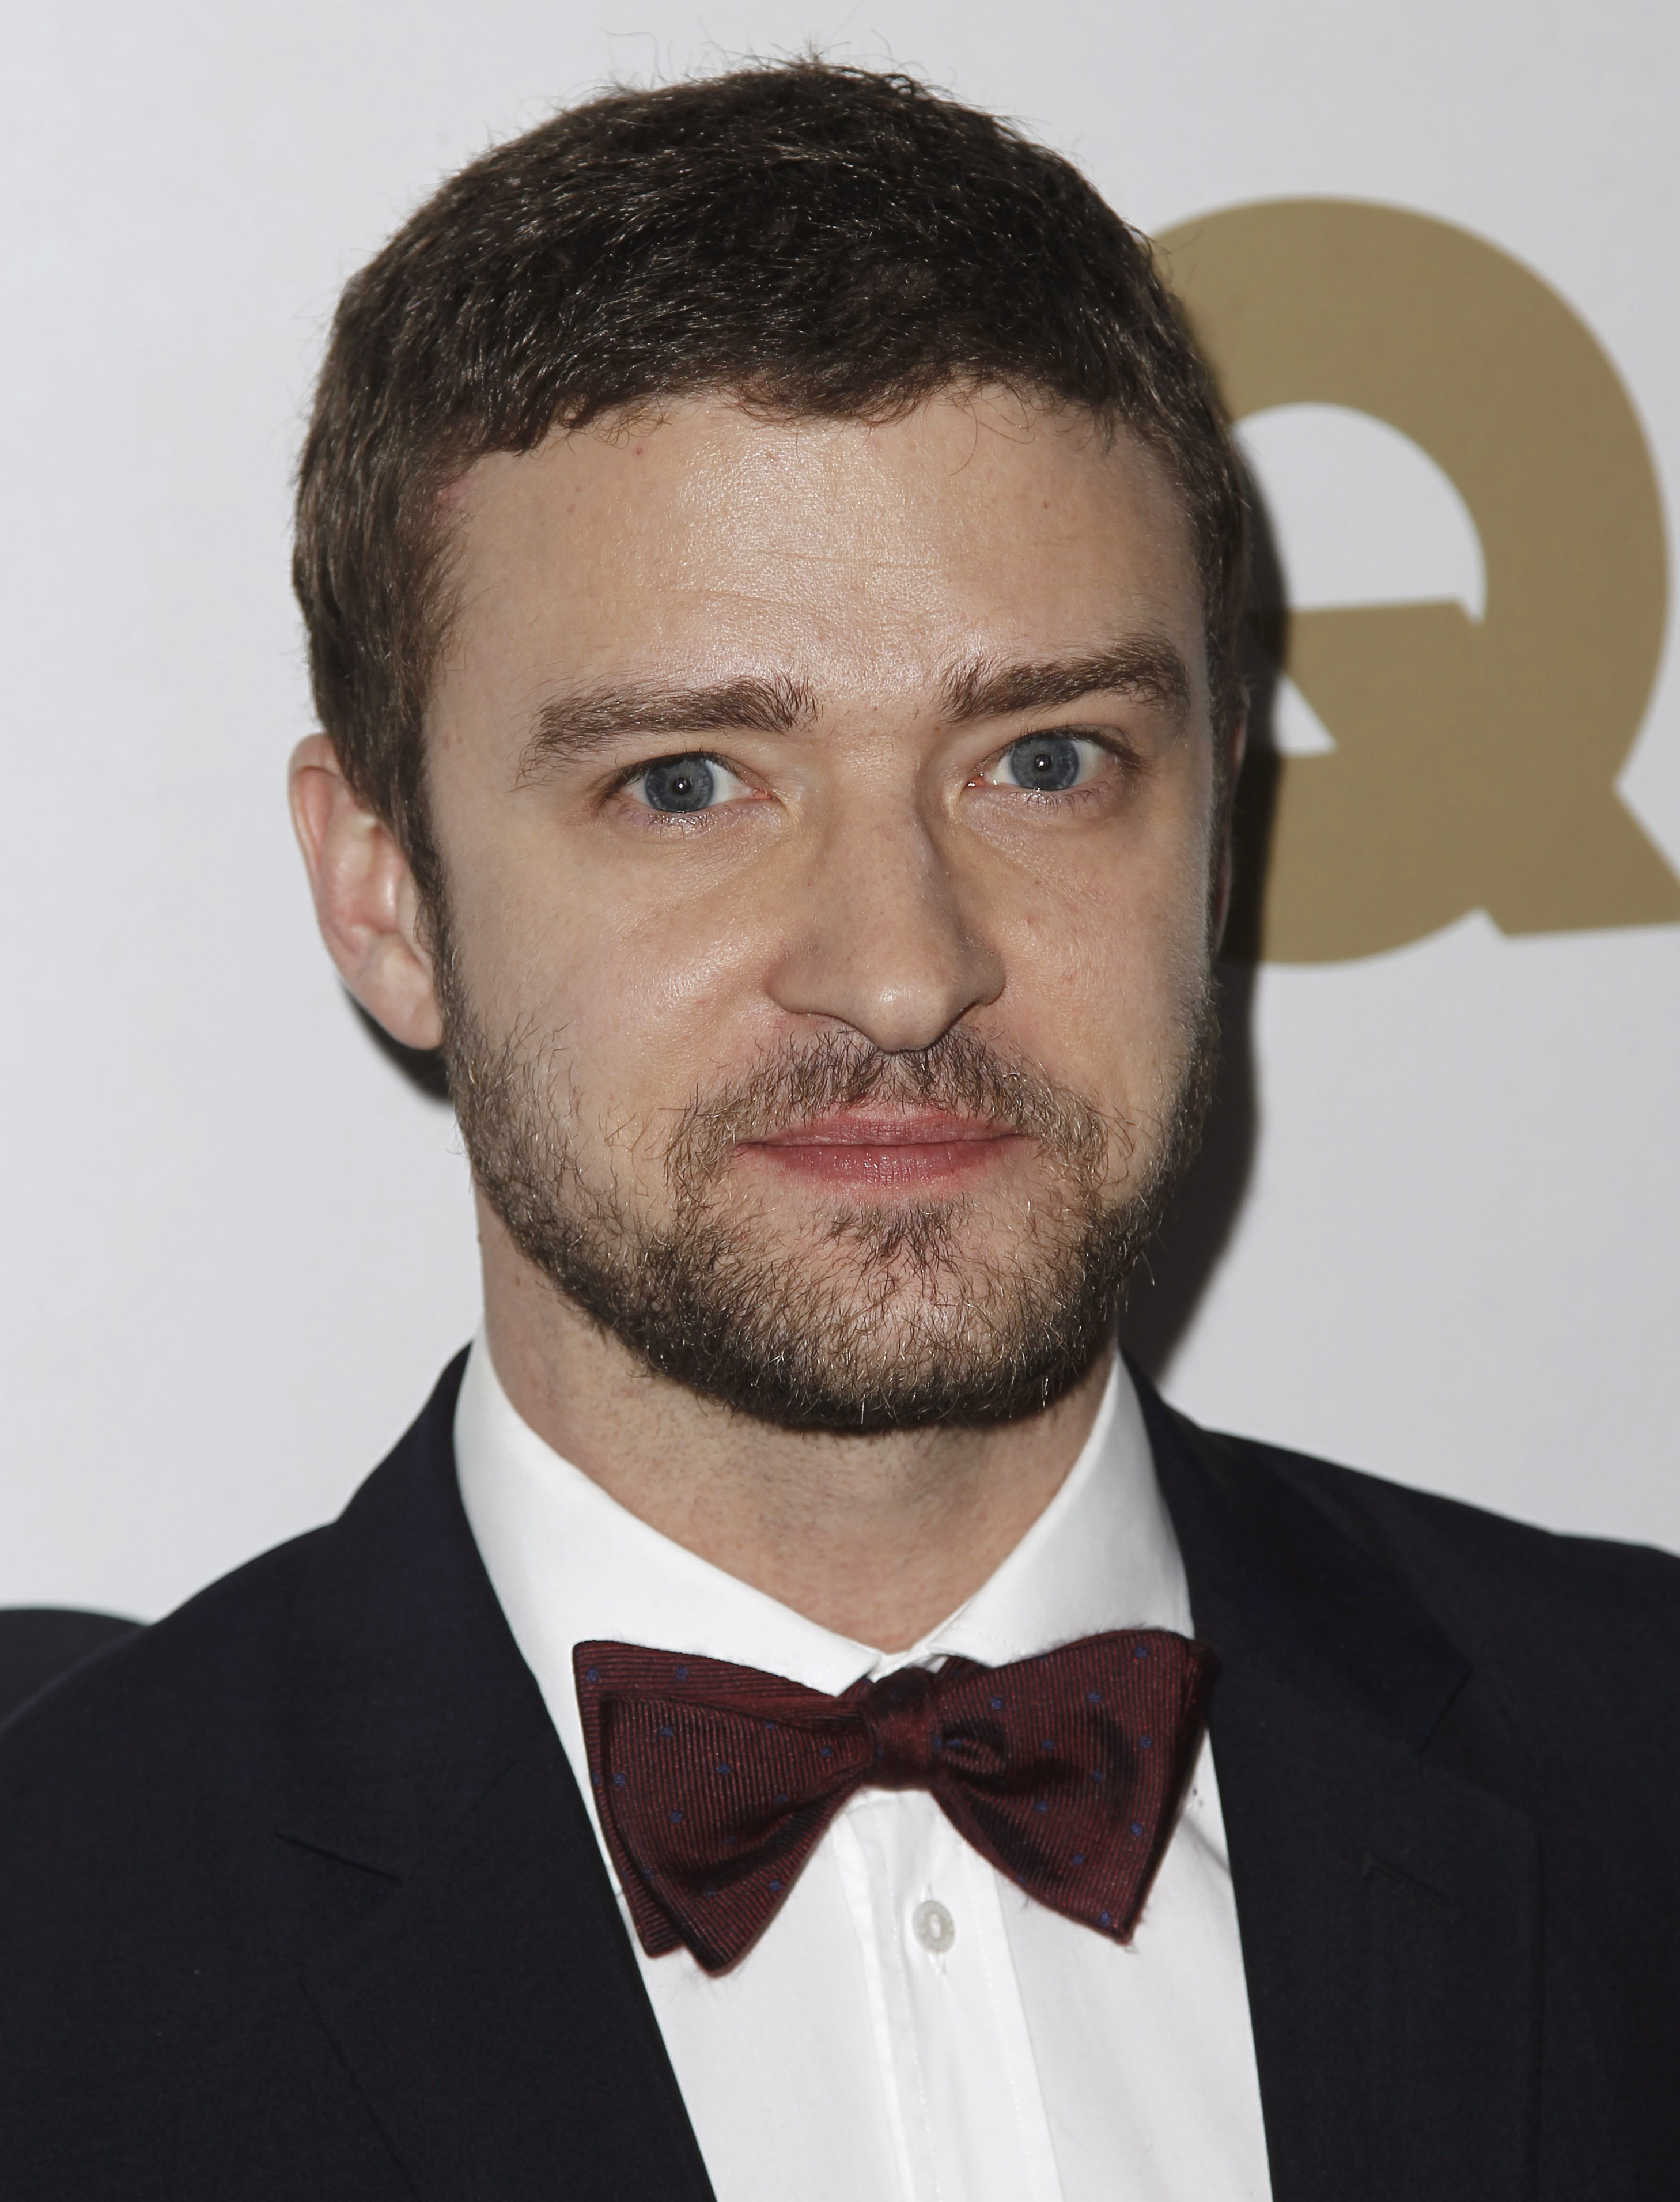 Introducing Justin Timberlake on the Cover of GQ's 2013 Men of the